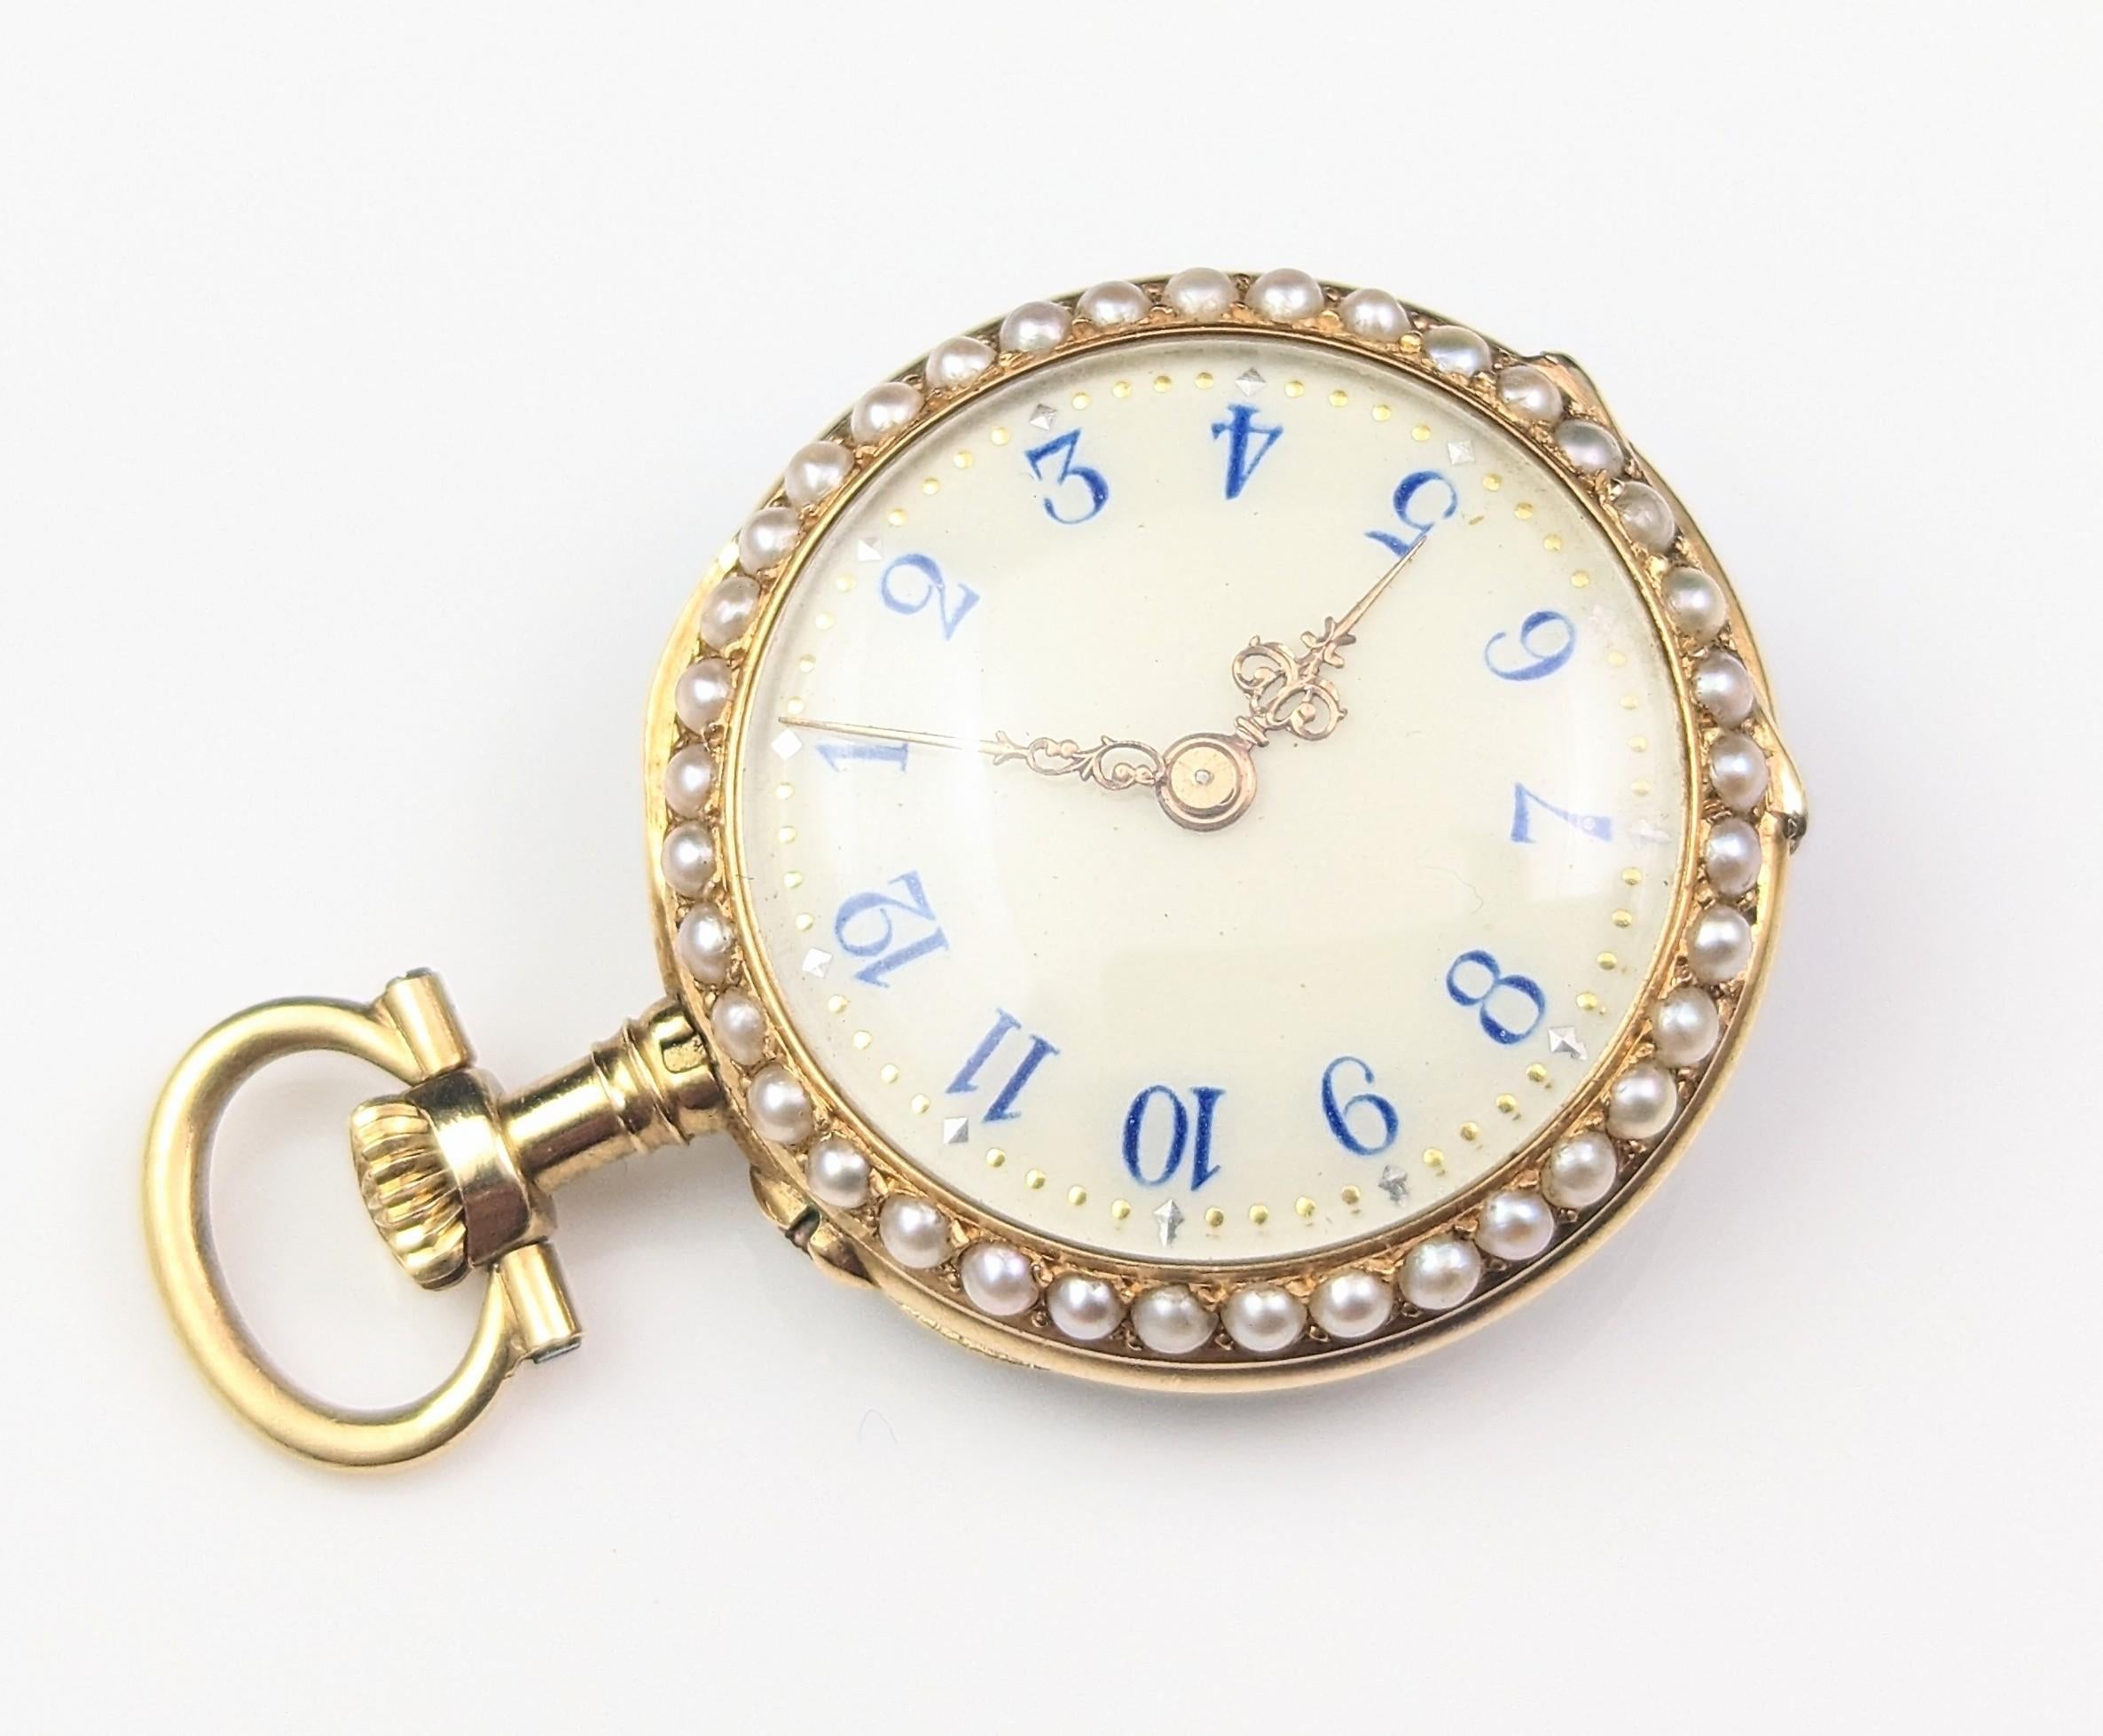 Antique Diamond and Pearl Fob Watch, 18 Karat Gold, Guilloche Enamel 8